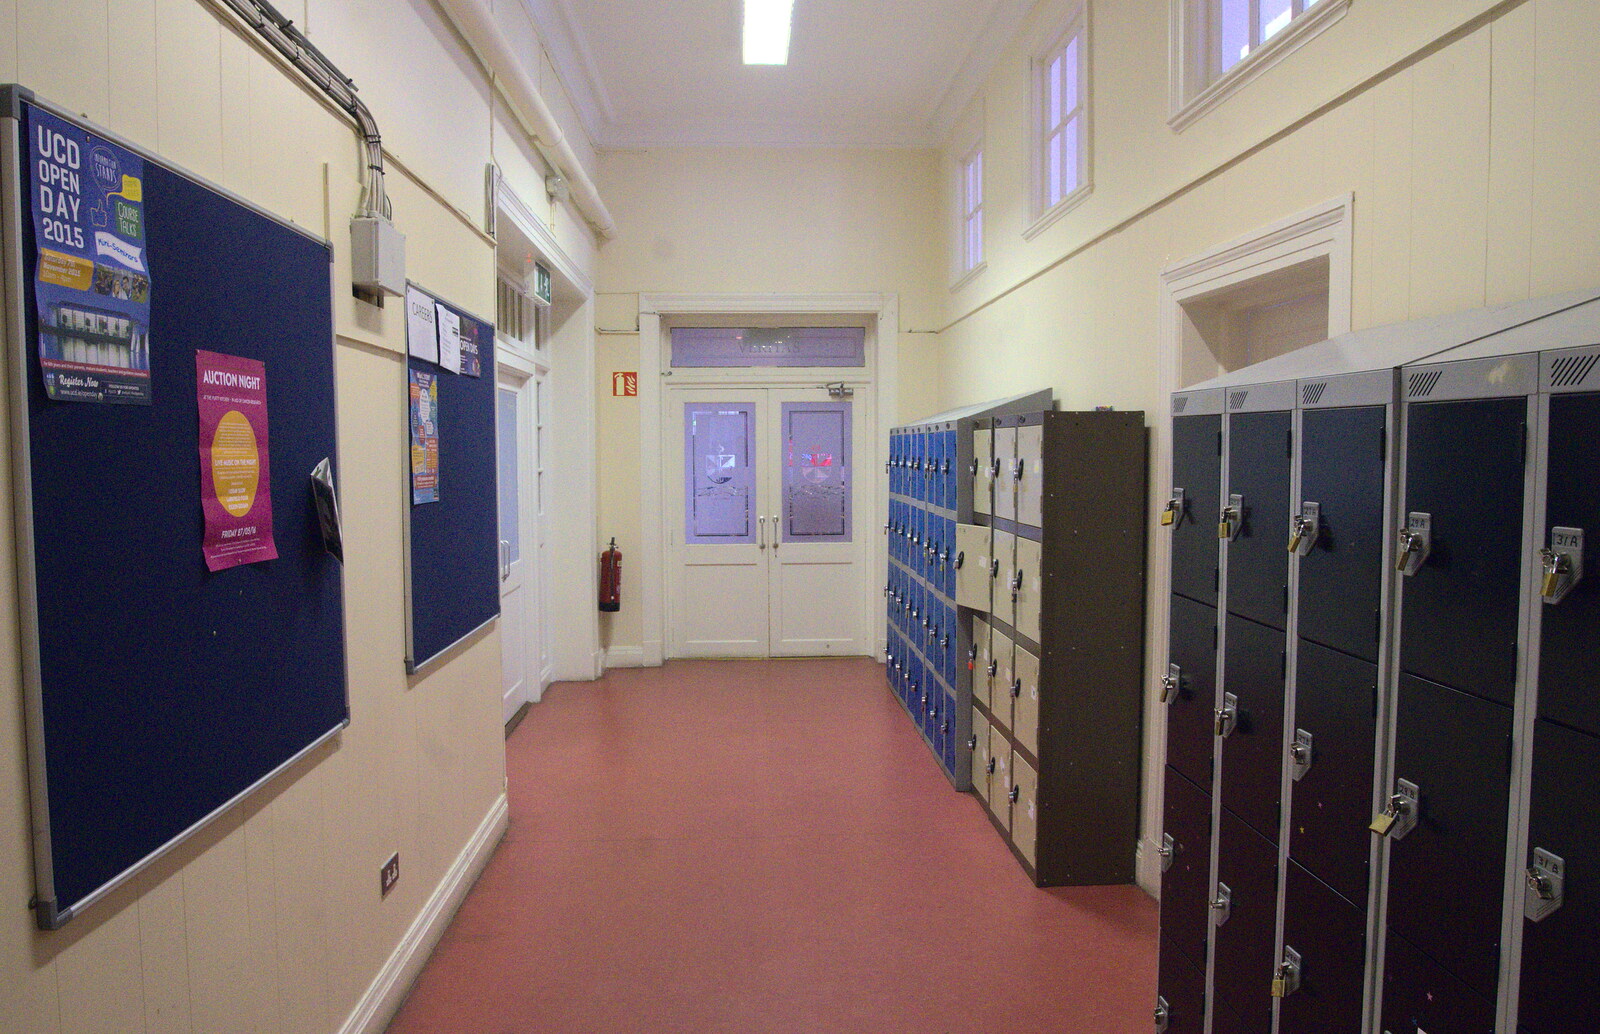 Another corridor, and more lockers from Sion Hill and Blackrock for the Day, Dublin, Ireland - 17th September 2016